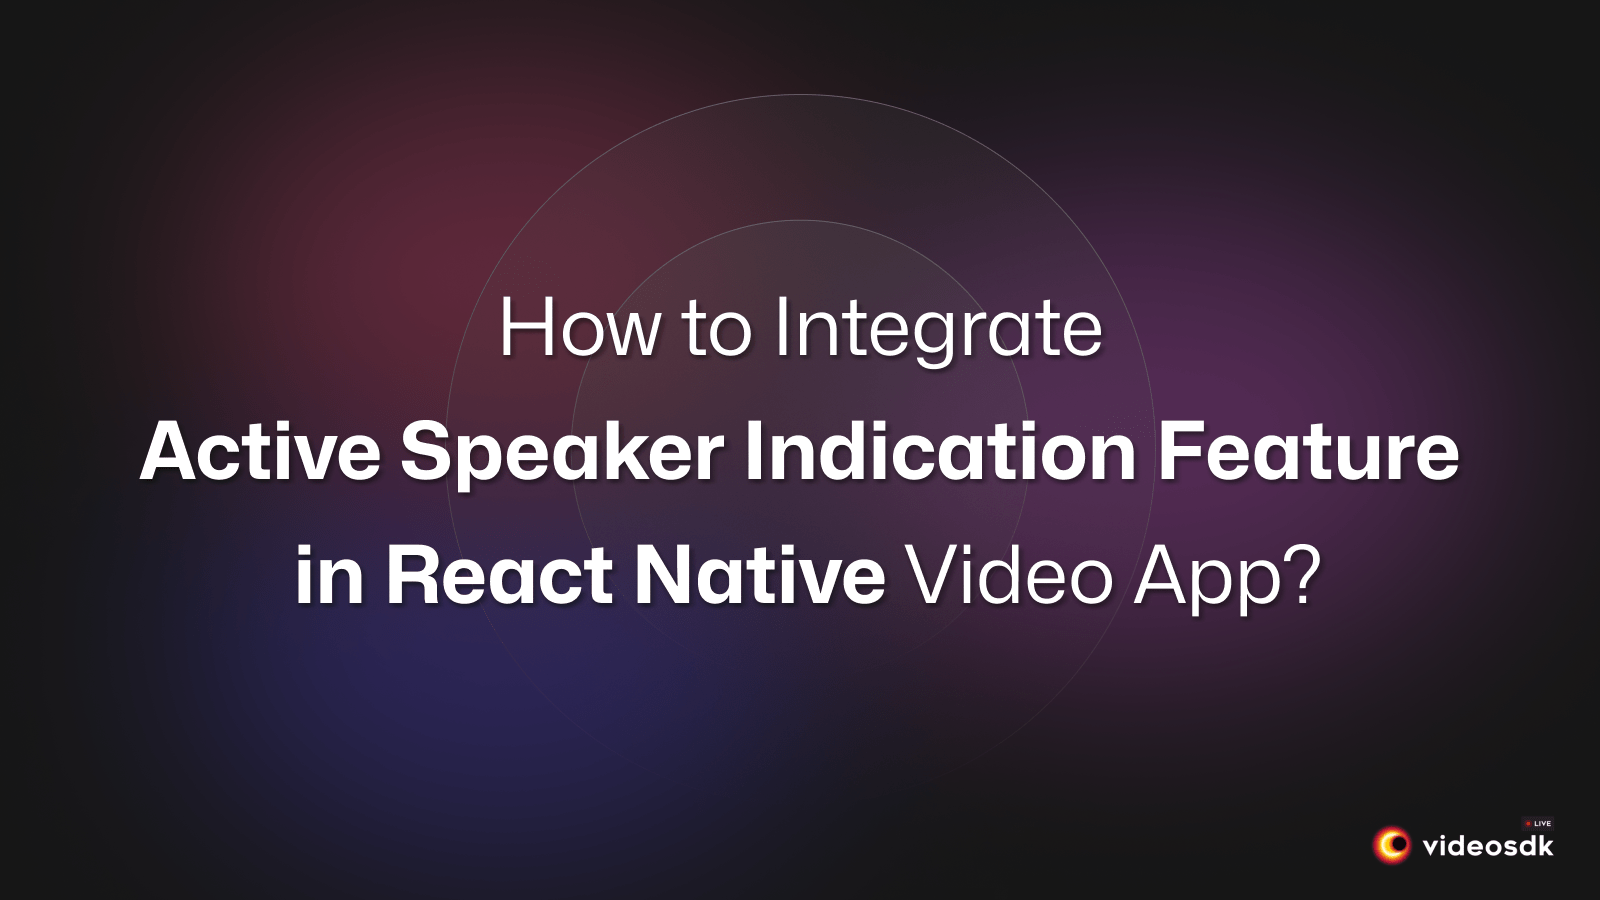 How to Integrate Active Speaker Indication in React Native Video Calling App?